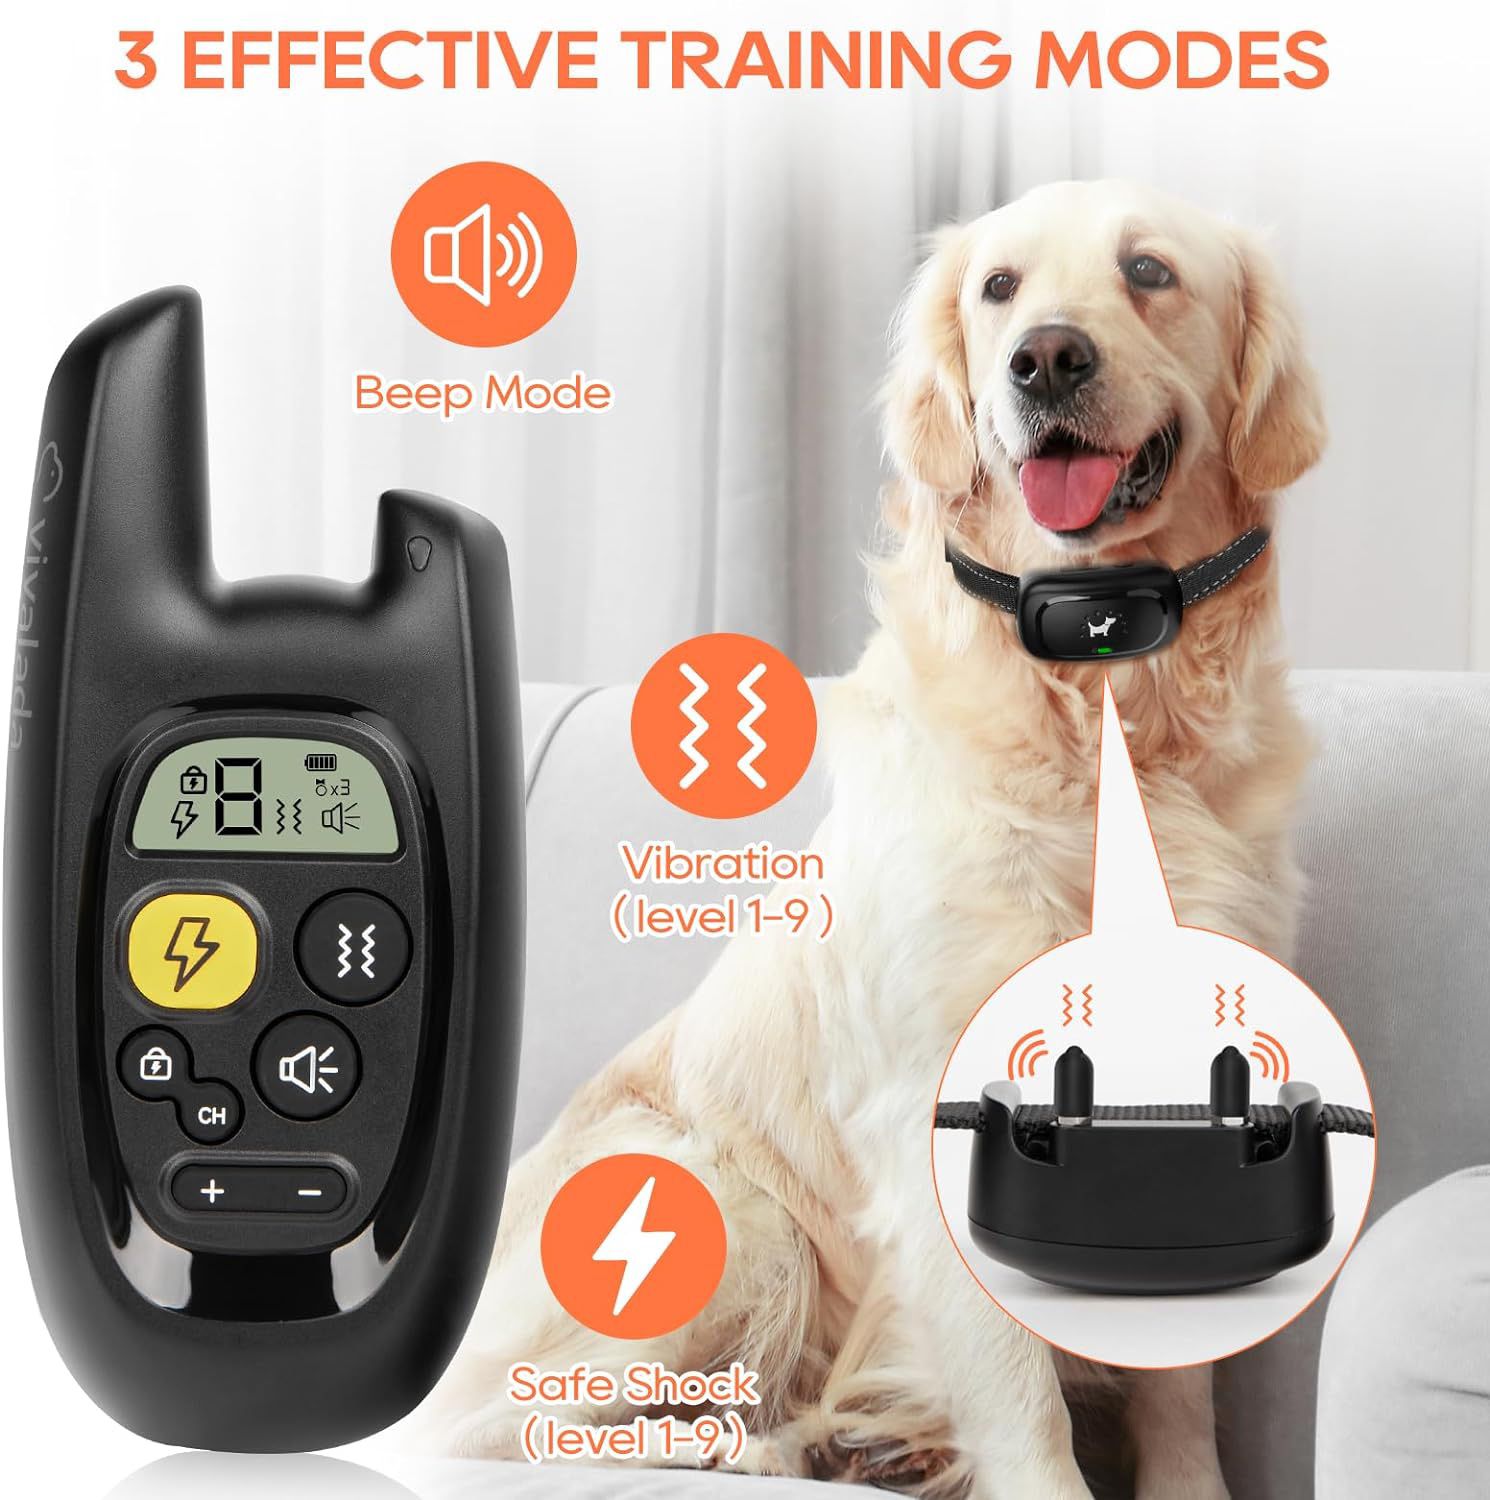 Vivalada Dog Training Collar with Remote, Shock Collar for Dogs with Beep, Vibration, Shock, 3 Channels and Security Lock, IPX7 Waterproof Rechargeabl